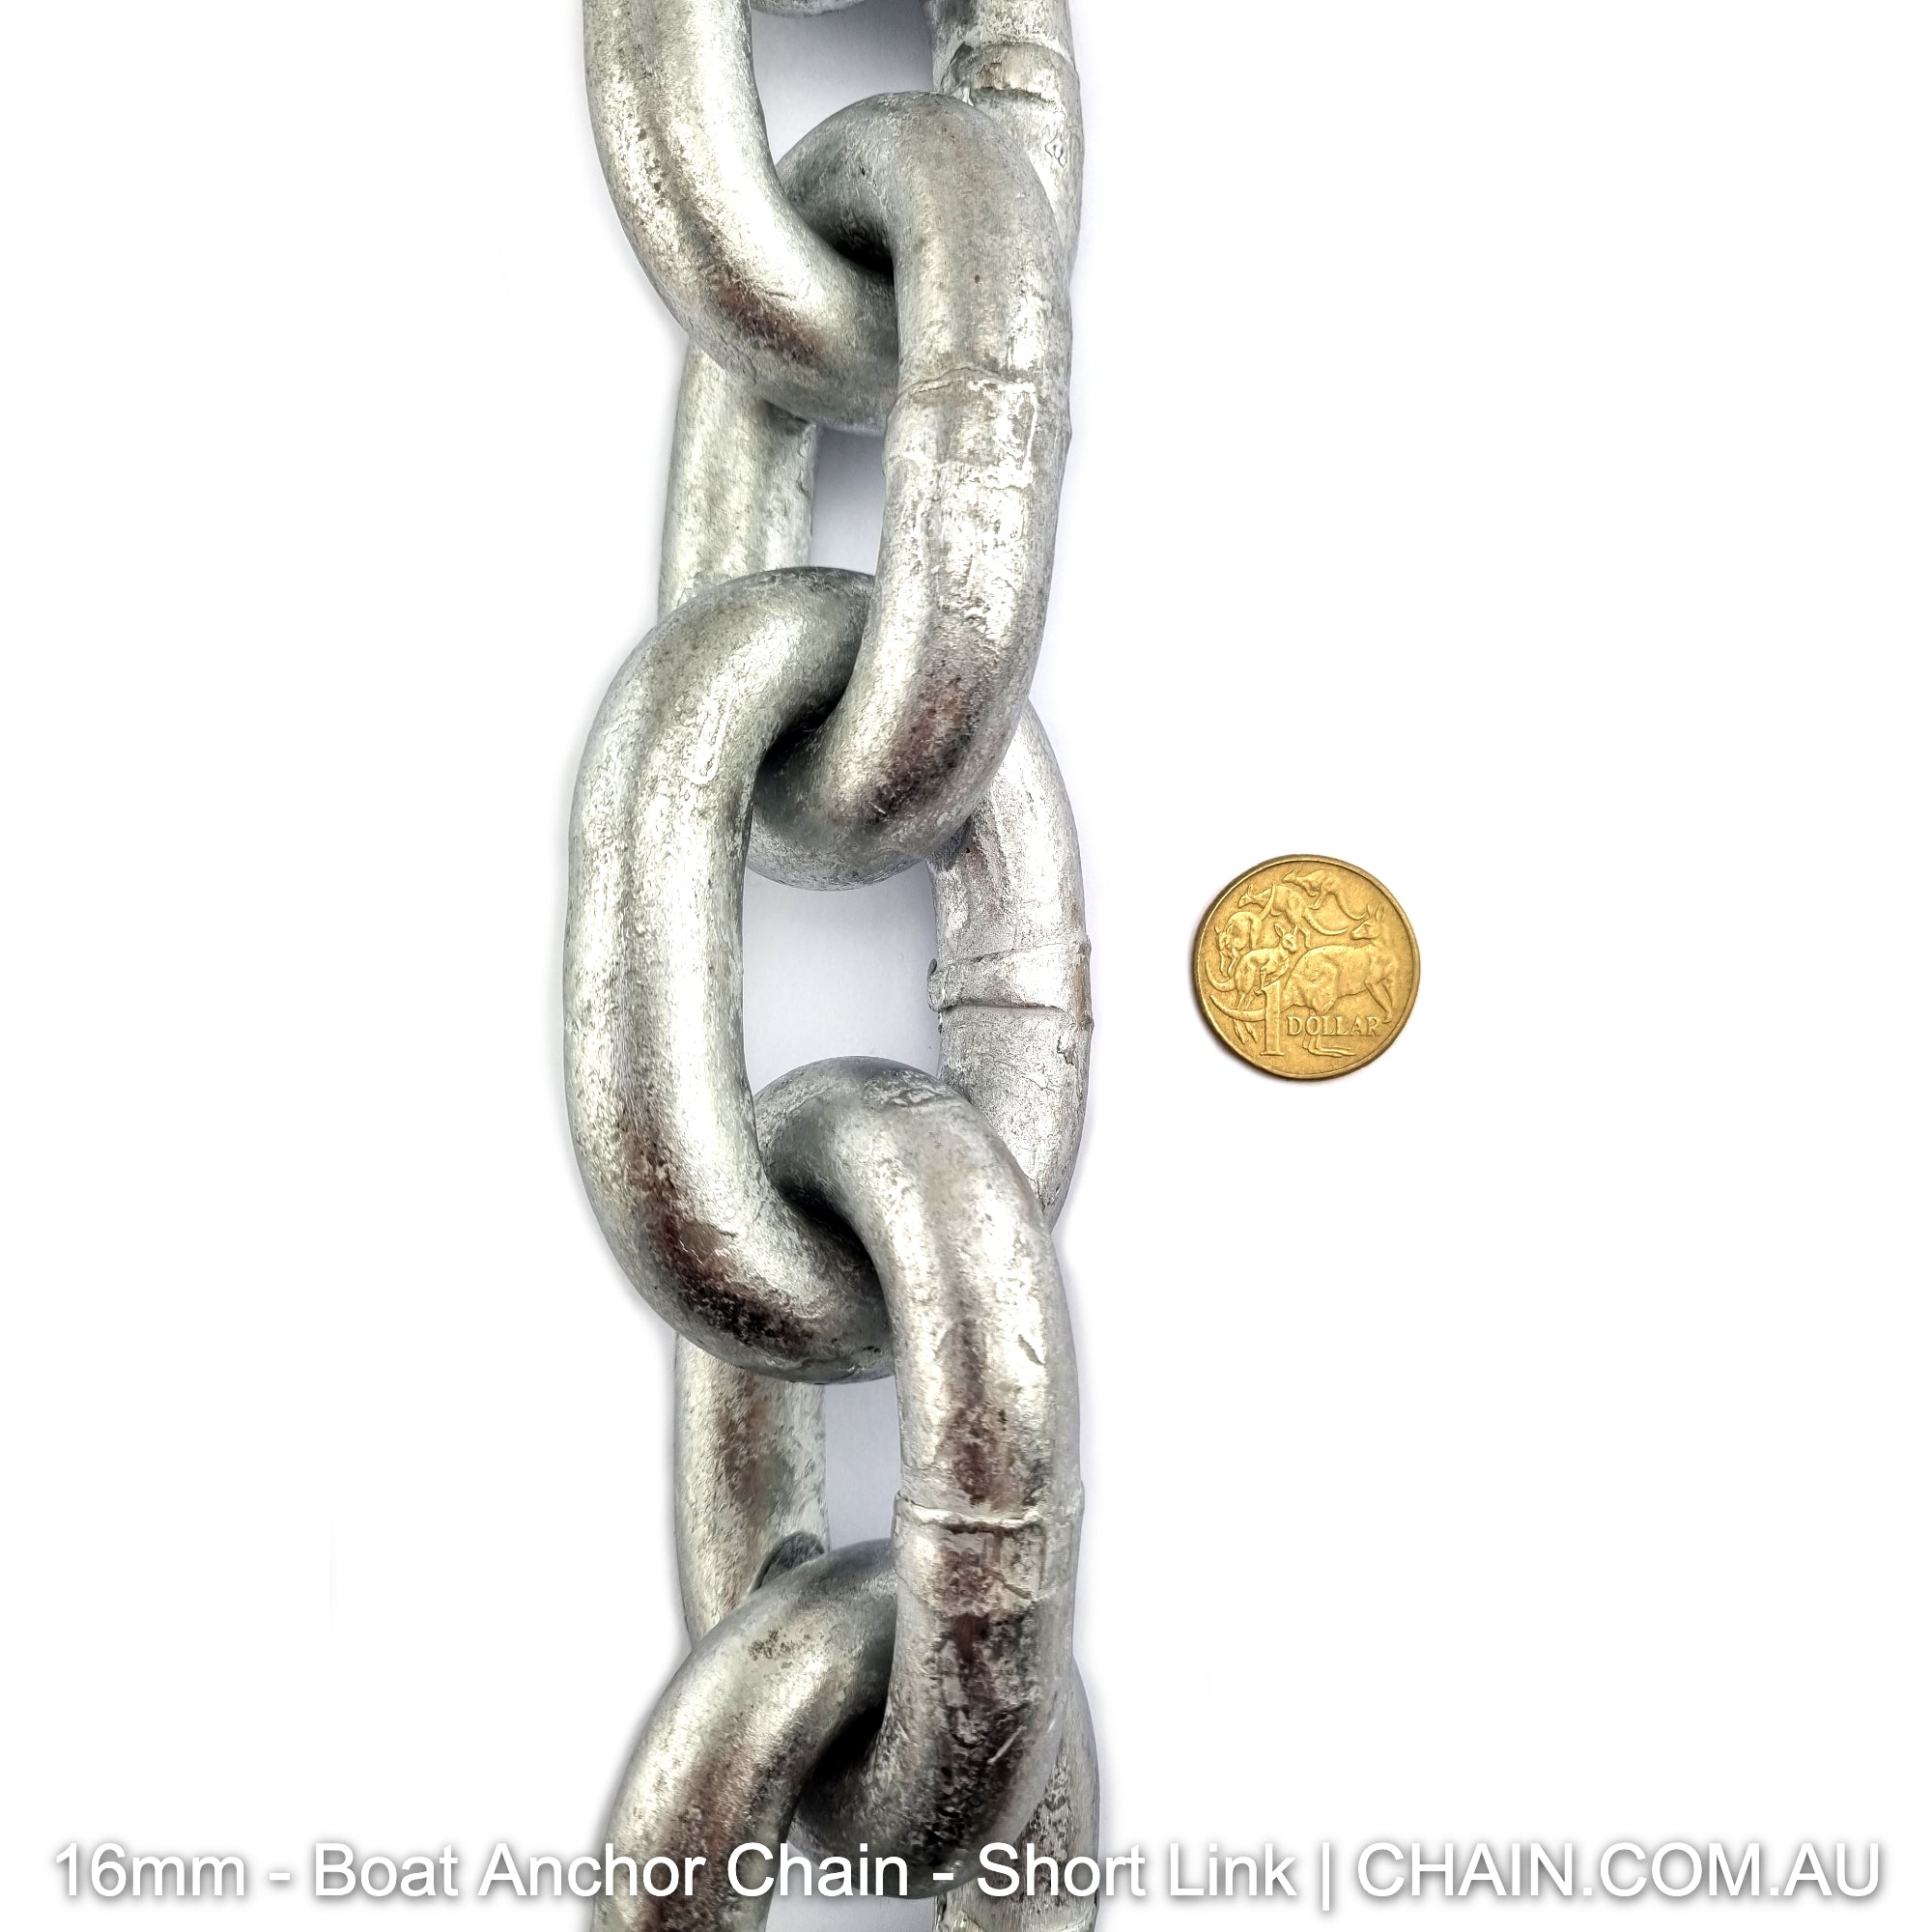 Boat Anchor Chain - Short Link - Galvanised-6